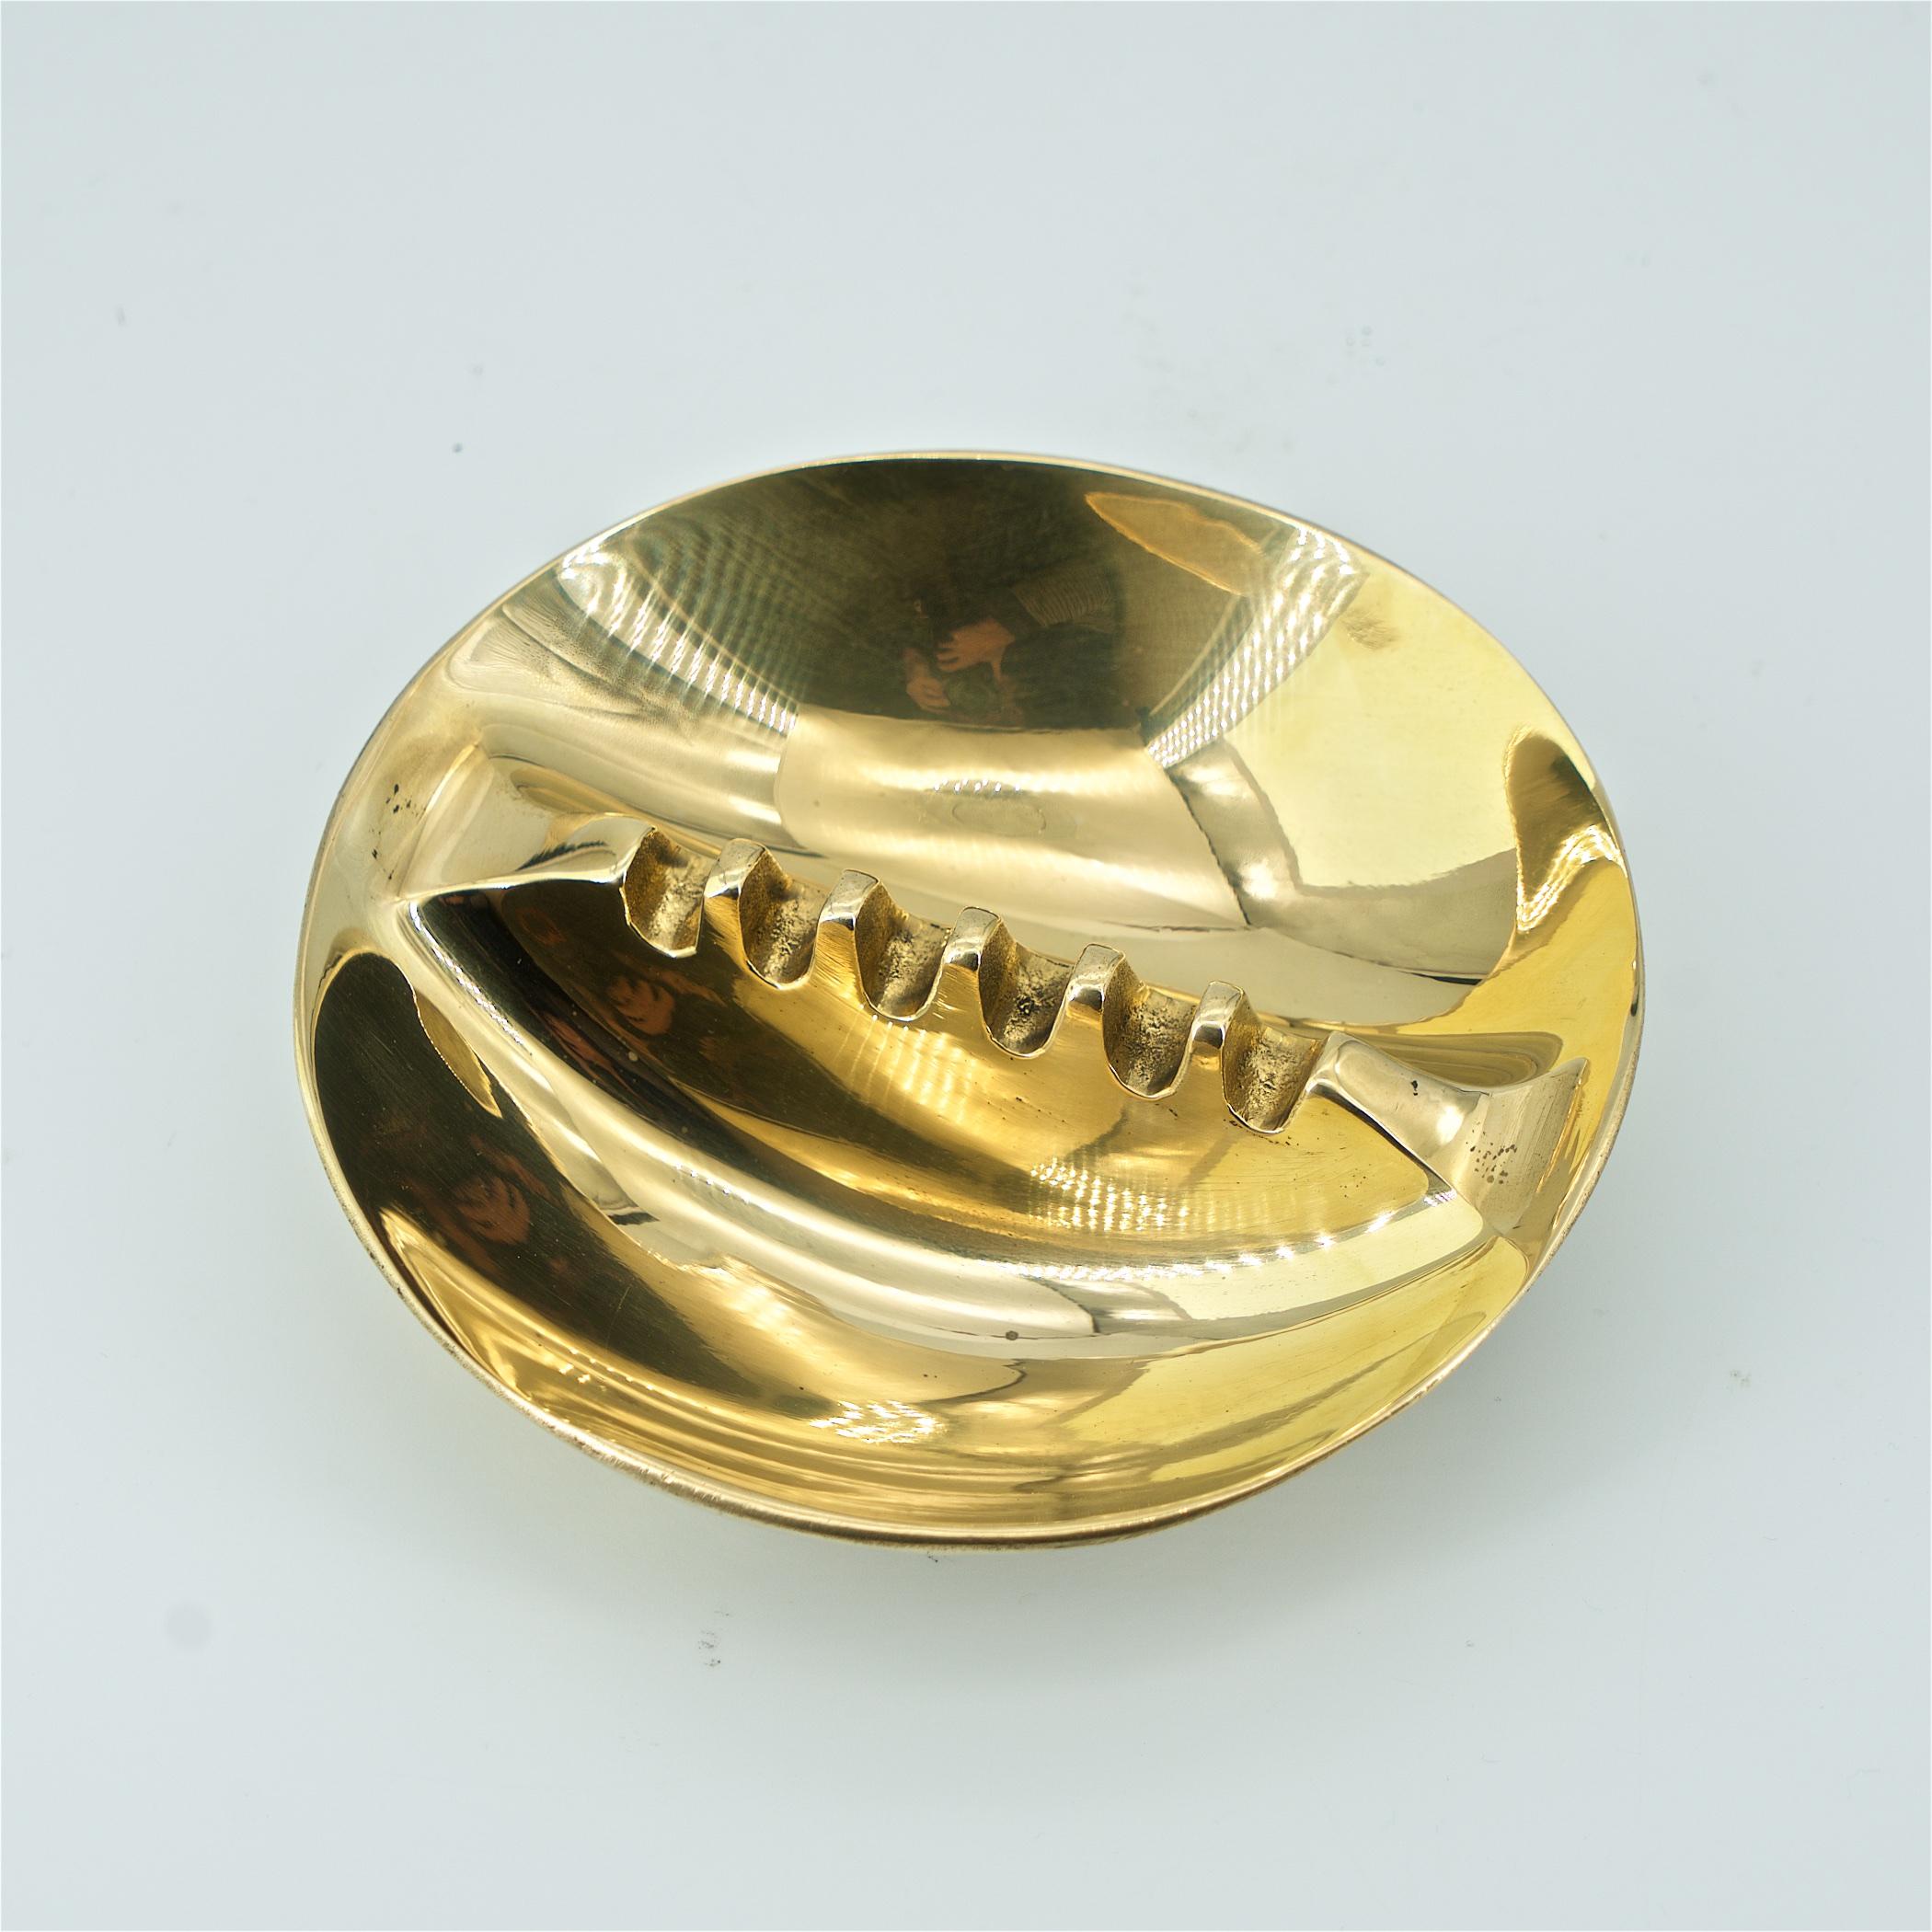 Cast 1970s Polished Gold Tone Ashtray Table Sculpture Mid-Century American Design